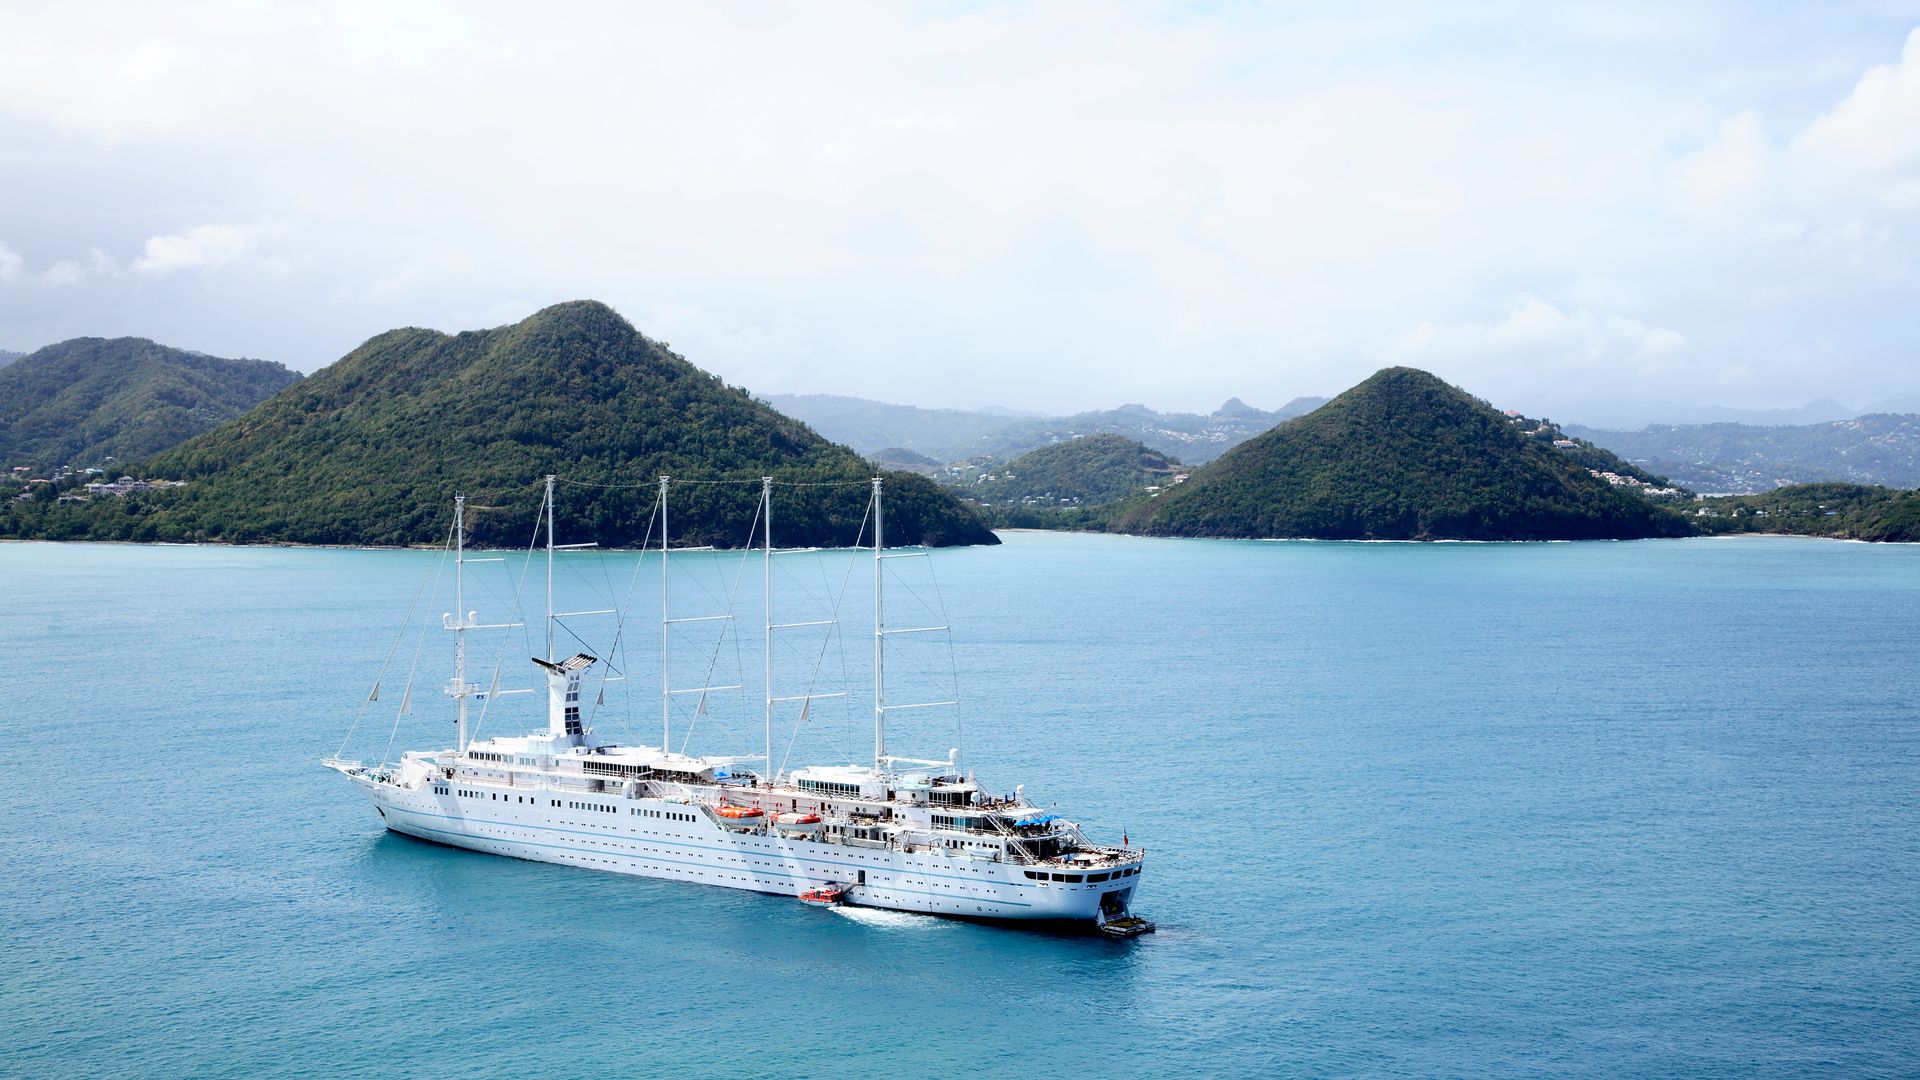 A cruise ship in St. Lucia